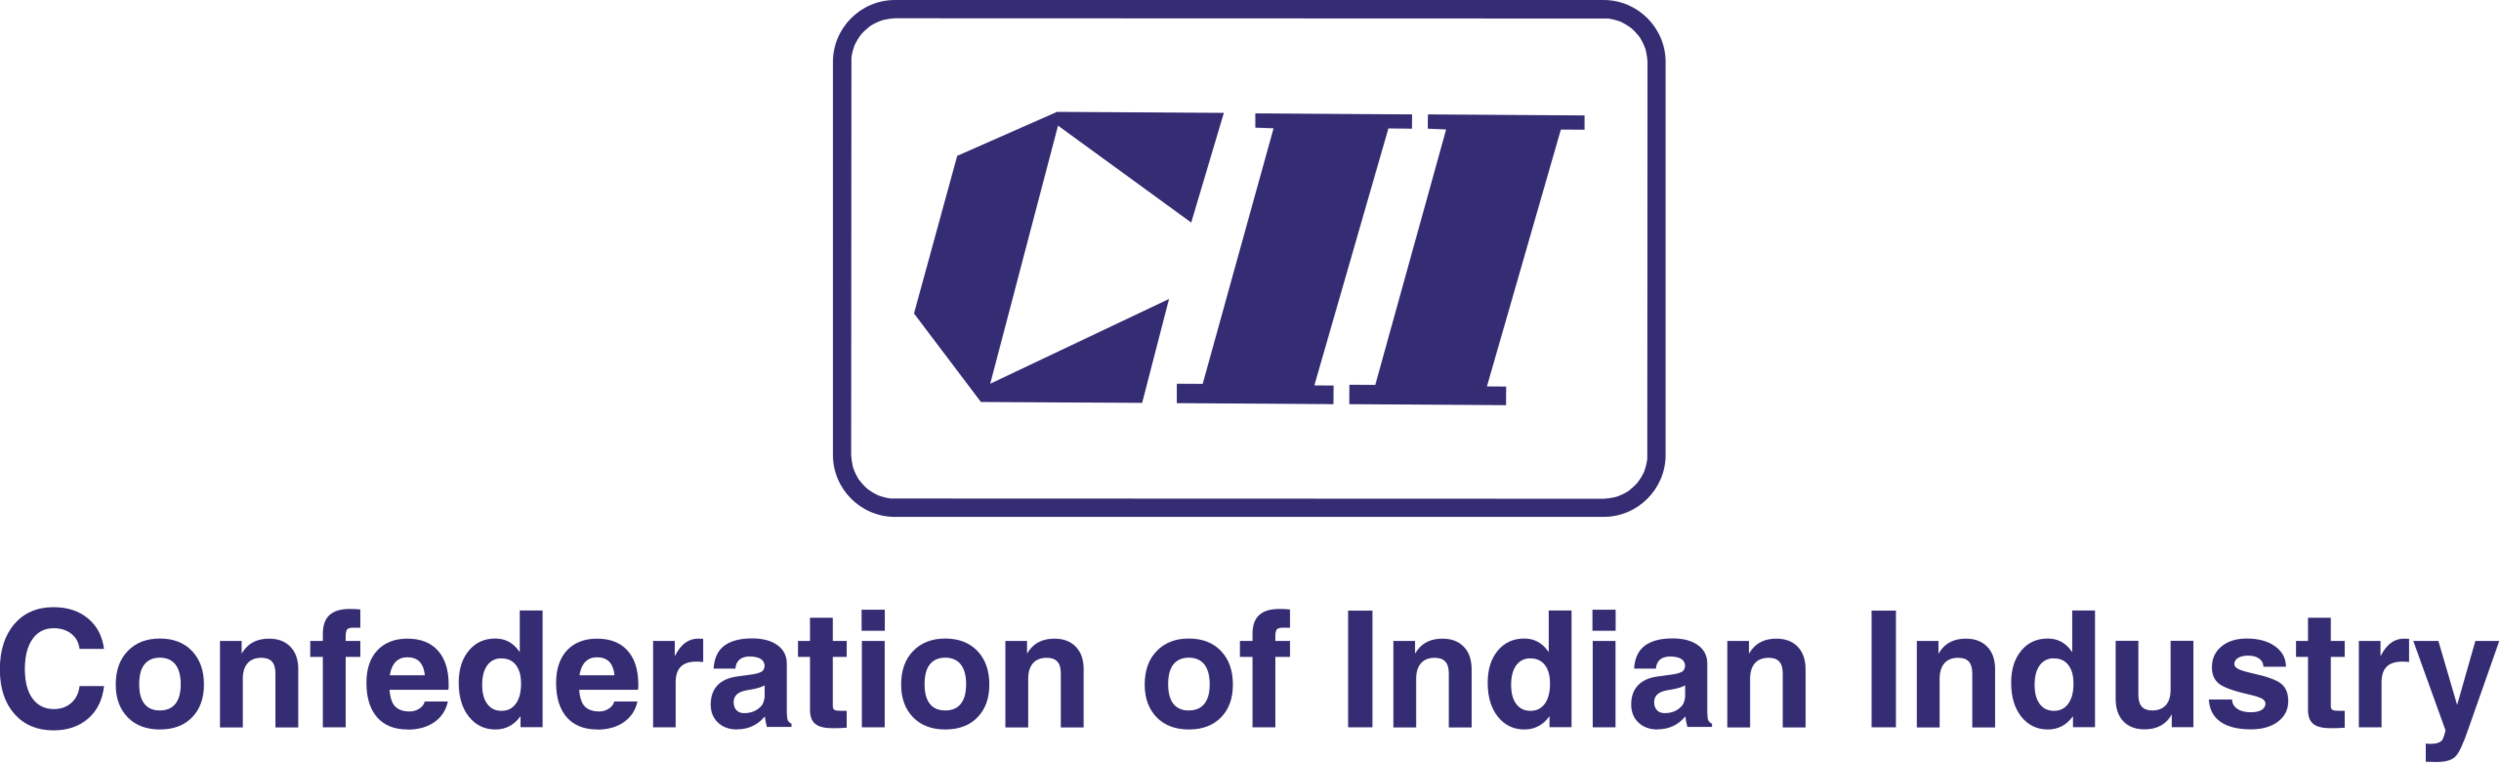 Official_logo_of_the_Confederation_of_Indian_Industry_(CII).svg.png